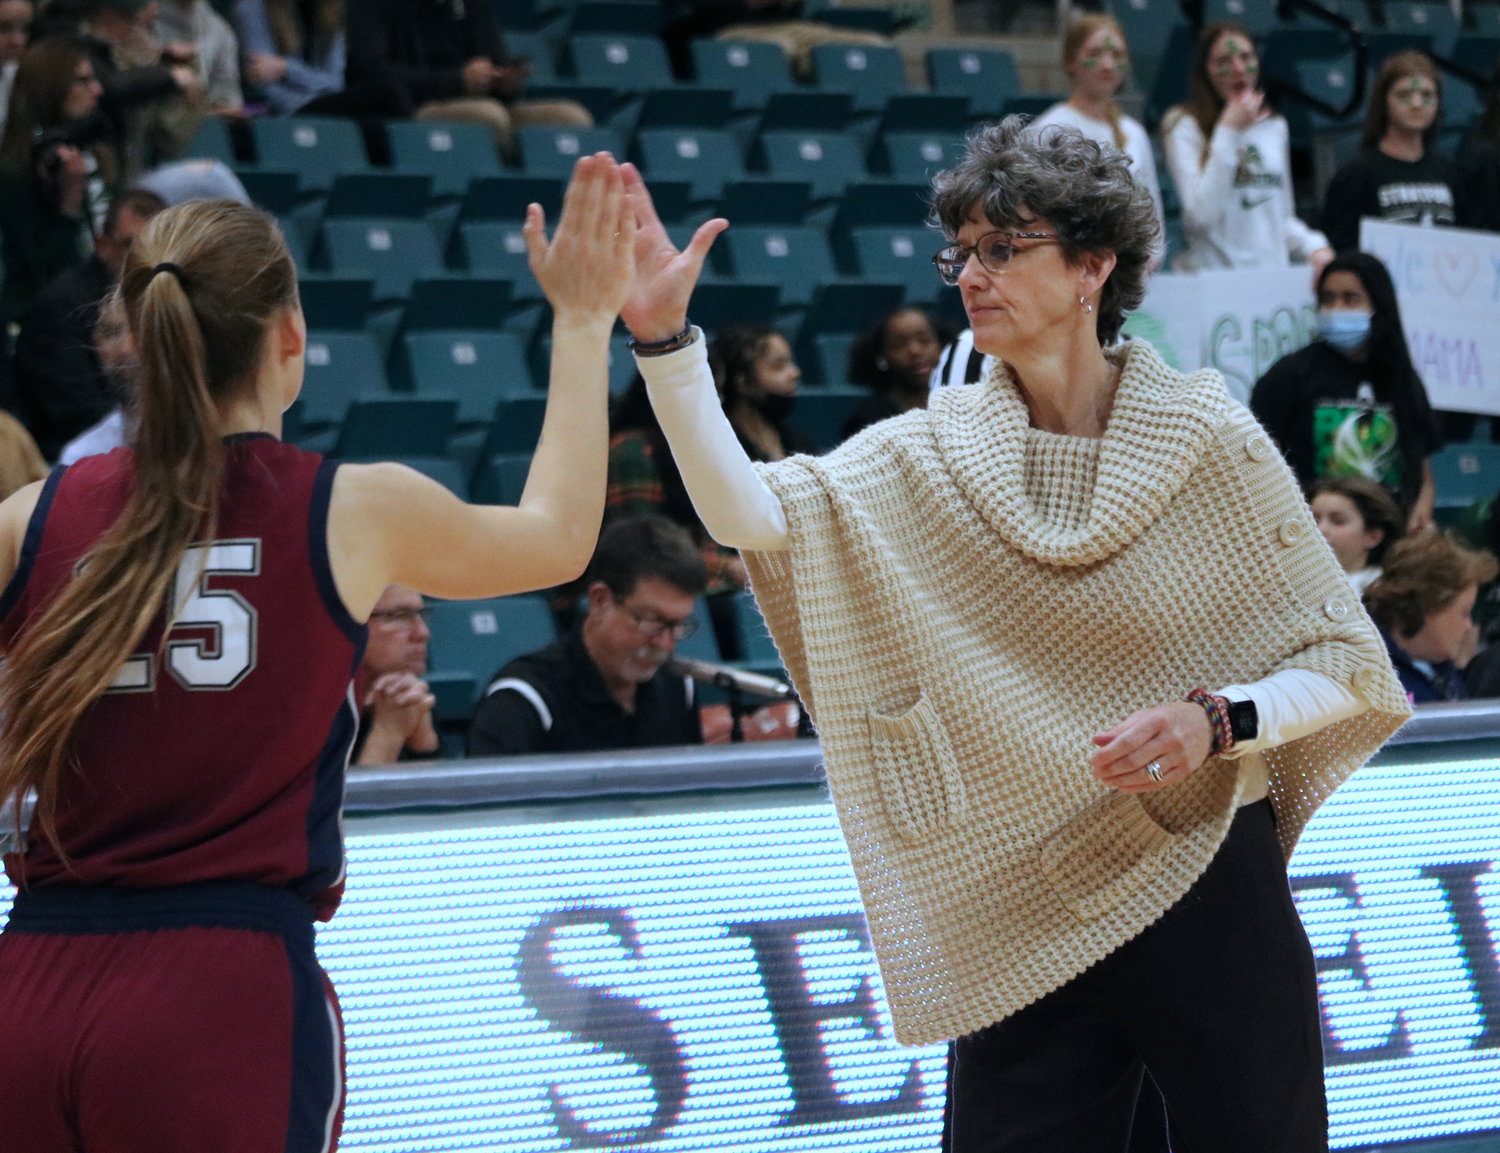 Tompkins head coach Tammy Ray gets ready for Friday’s game between Tompkins and Stratford at the Merrell Center.